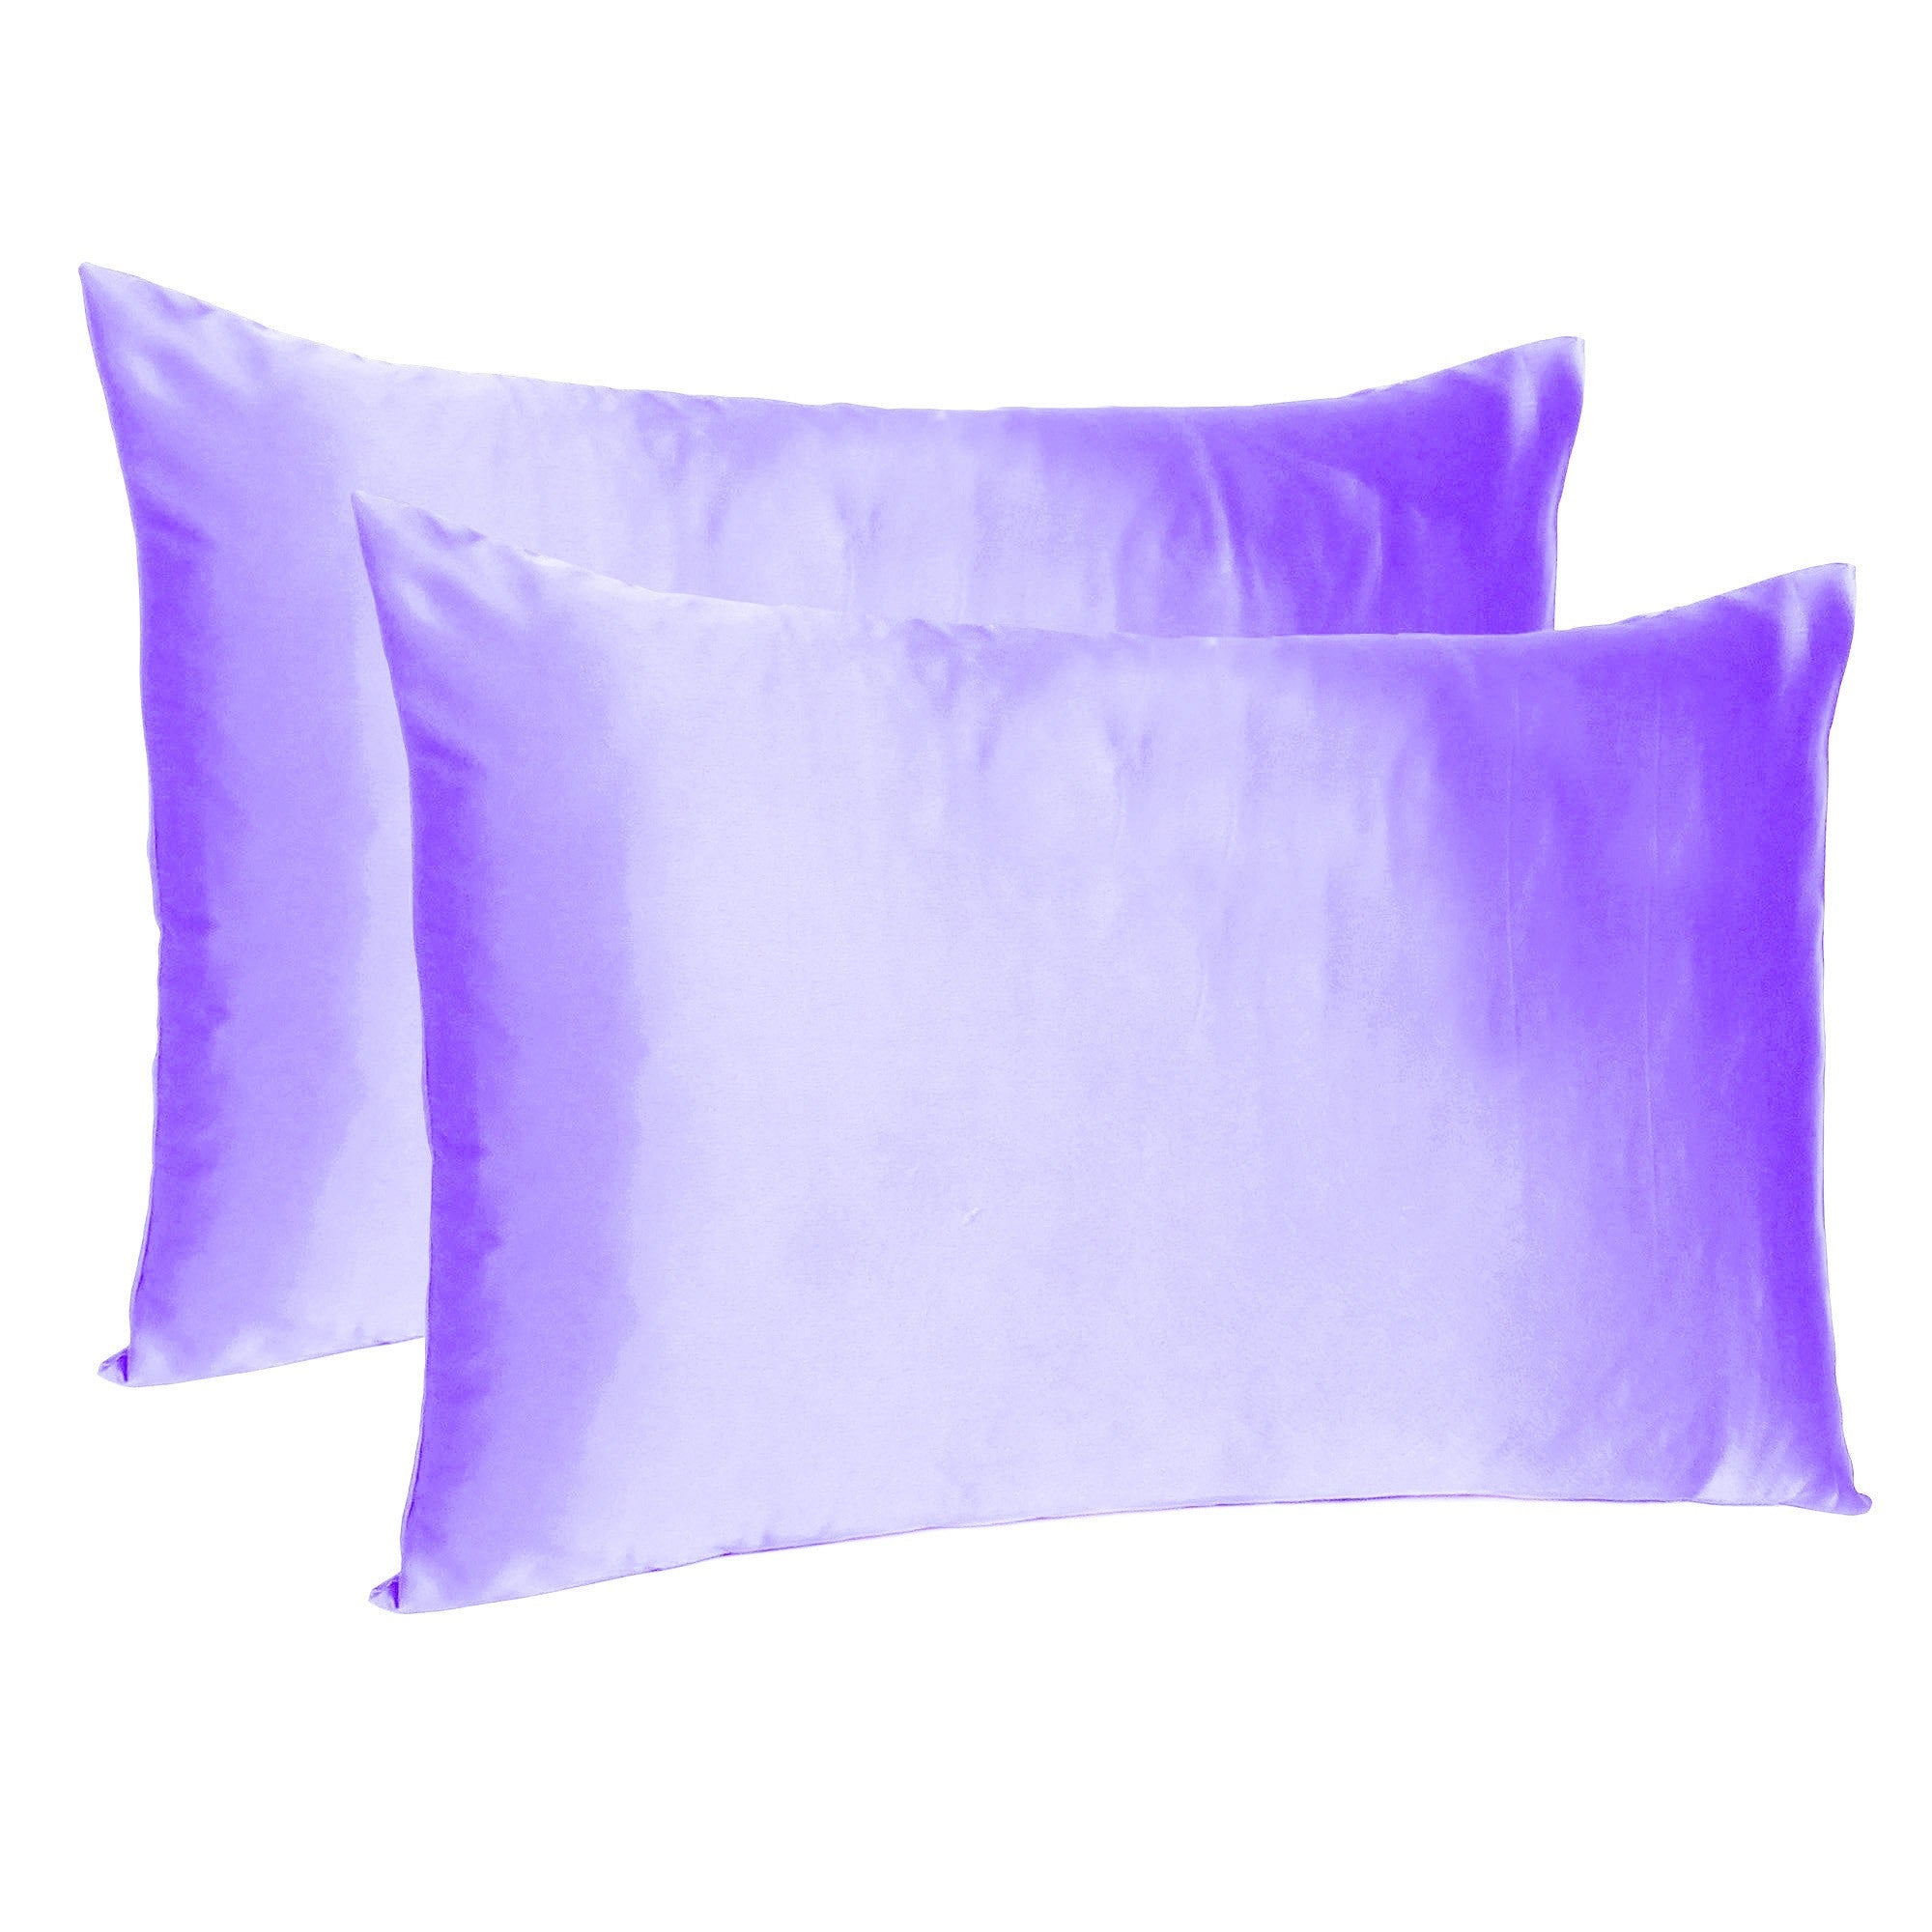 Purple-Dreamy-Set-Of-2-Silky-Satin-Queen-Pillowcases-Bed-Sheets